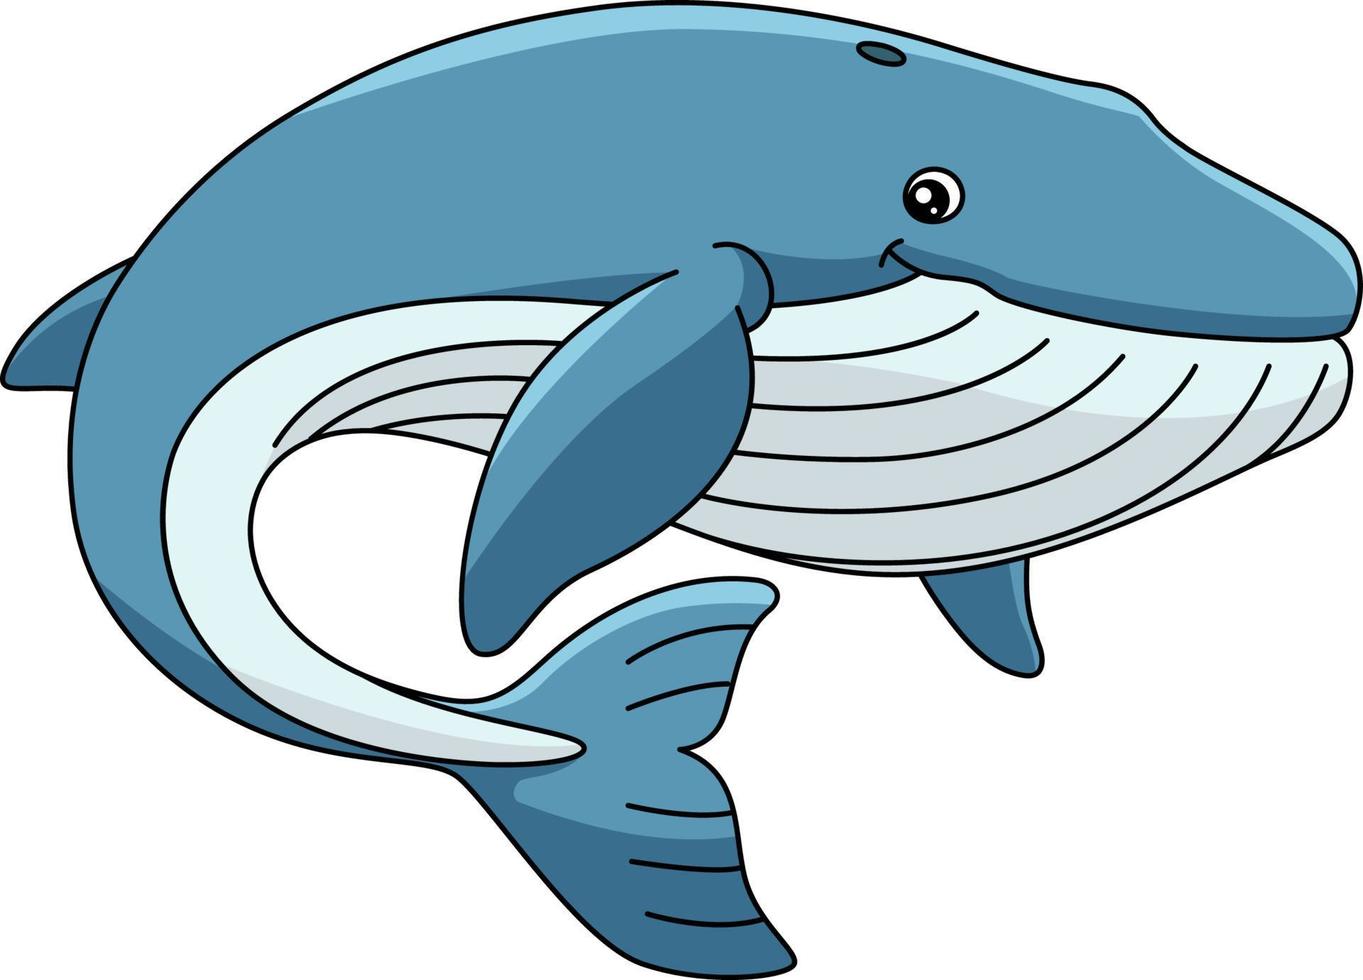 Blue Whale Cartoon Colored Clipart Illustration vector